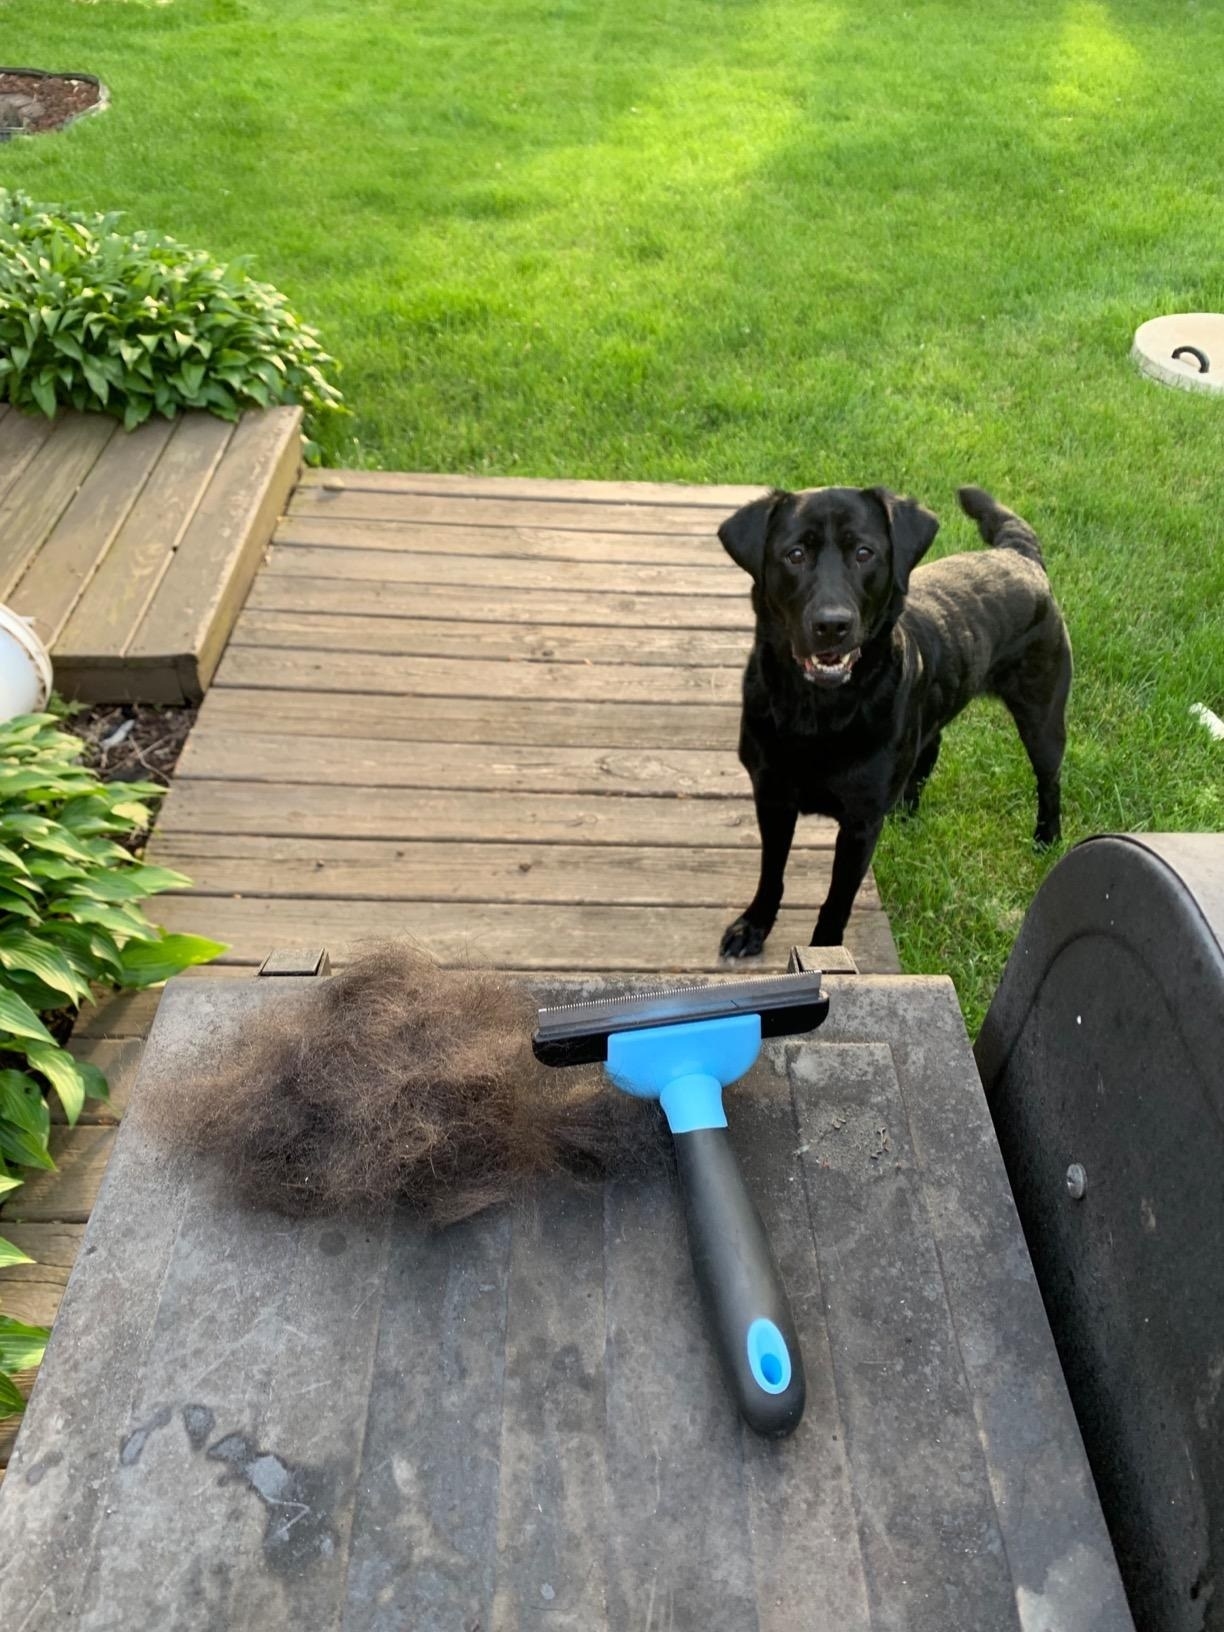 large black dog standing in front of large fur pile removed by the blue grooming brush